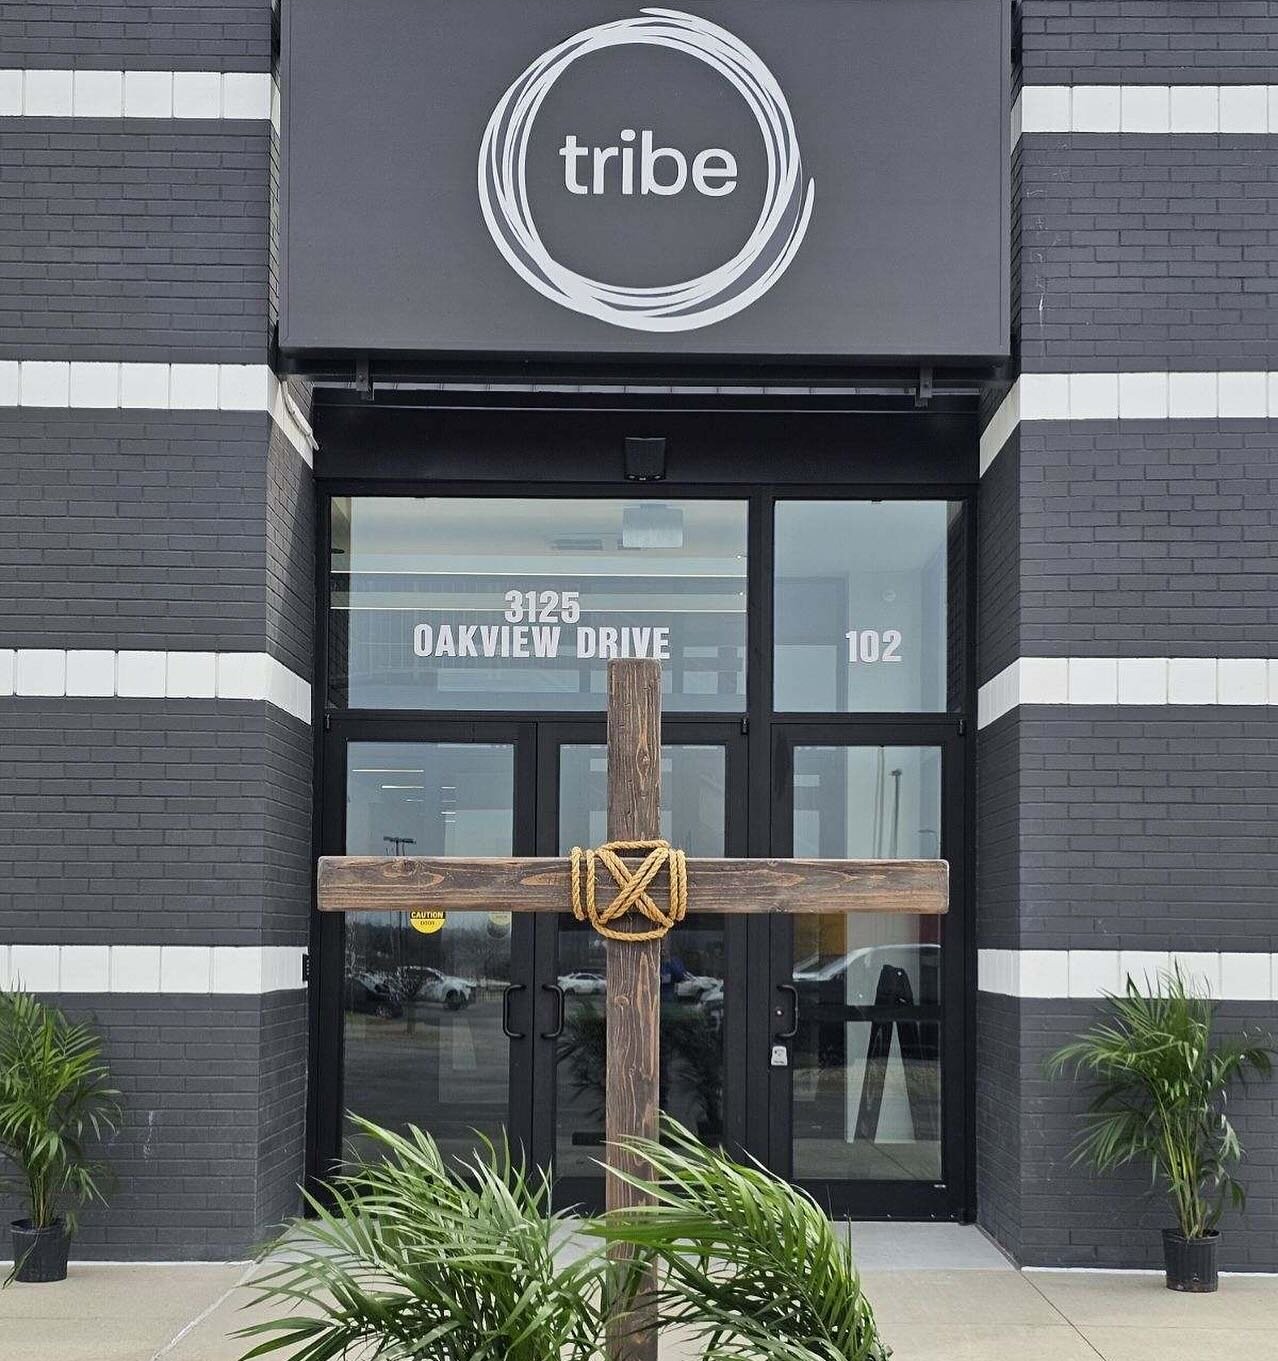 Join us for Good Friday Service tonight 7 pm - 8 pm at Tribe Church (3125 Oak View Drive, Omaha, NE 68144). We will take communion together and reflect on the sacrifice Jesus made for us. 🤎